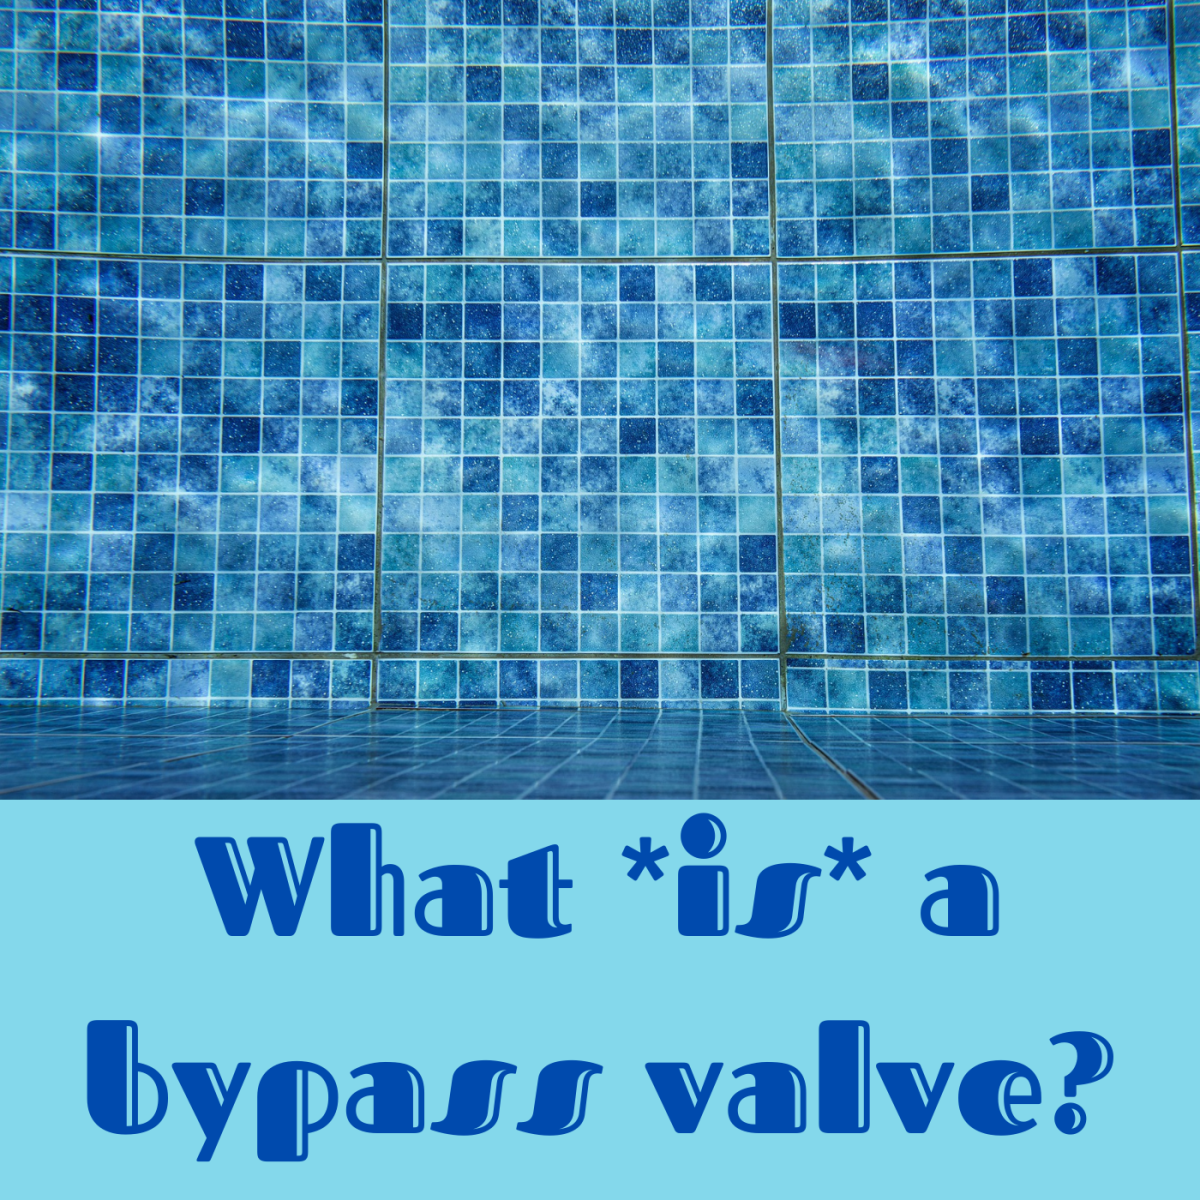 What Is a Bypass Valve on a Swimming Pool Heater for?